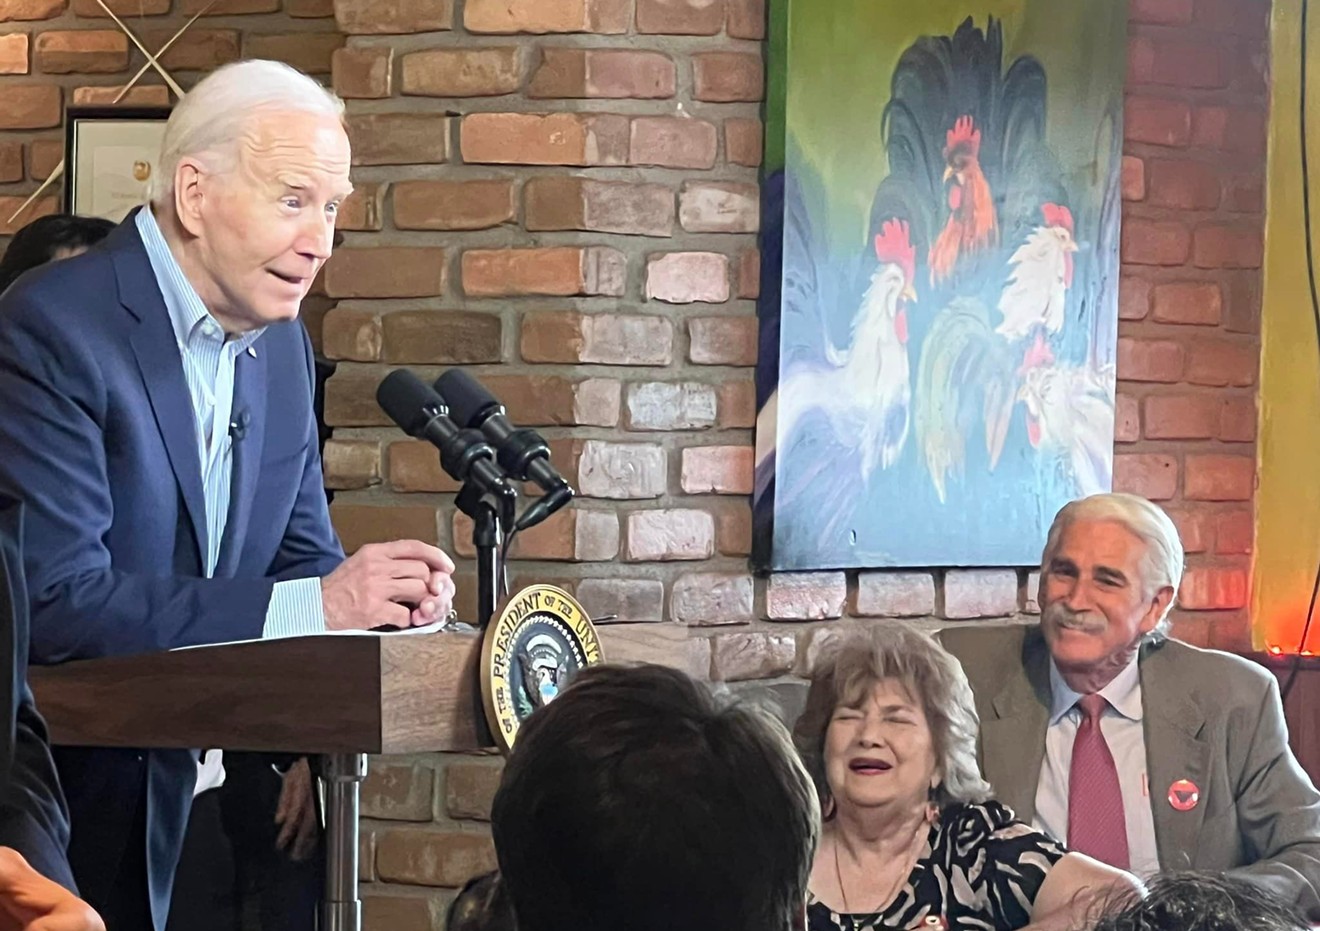 President Joe Biden visited El Portal Mexican Restaurant on Tuesday as he won the Democratic primary in Arizona.